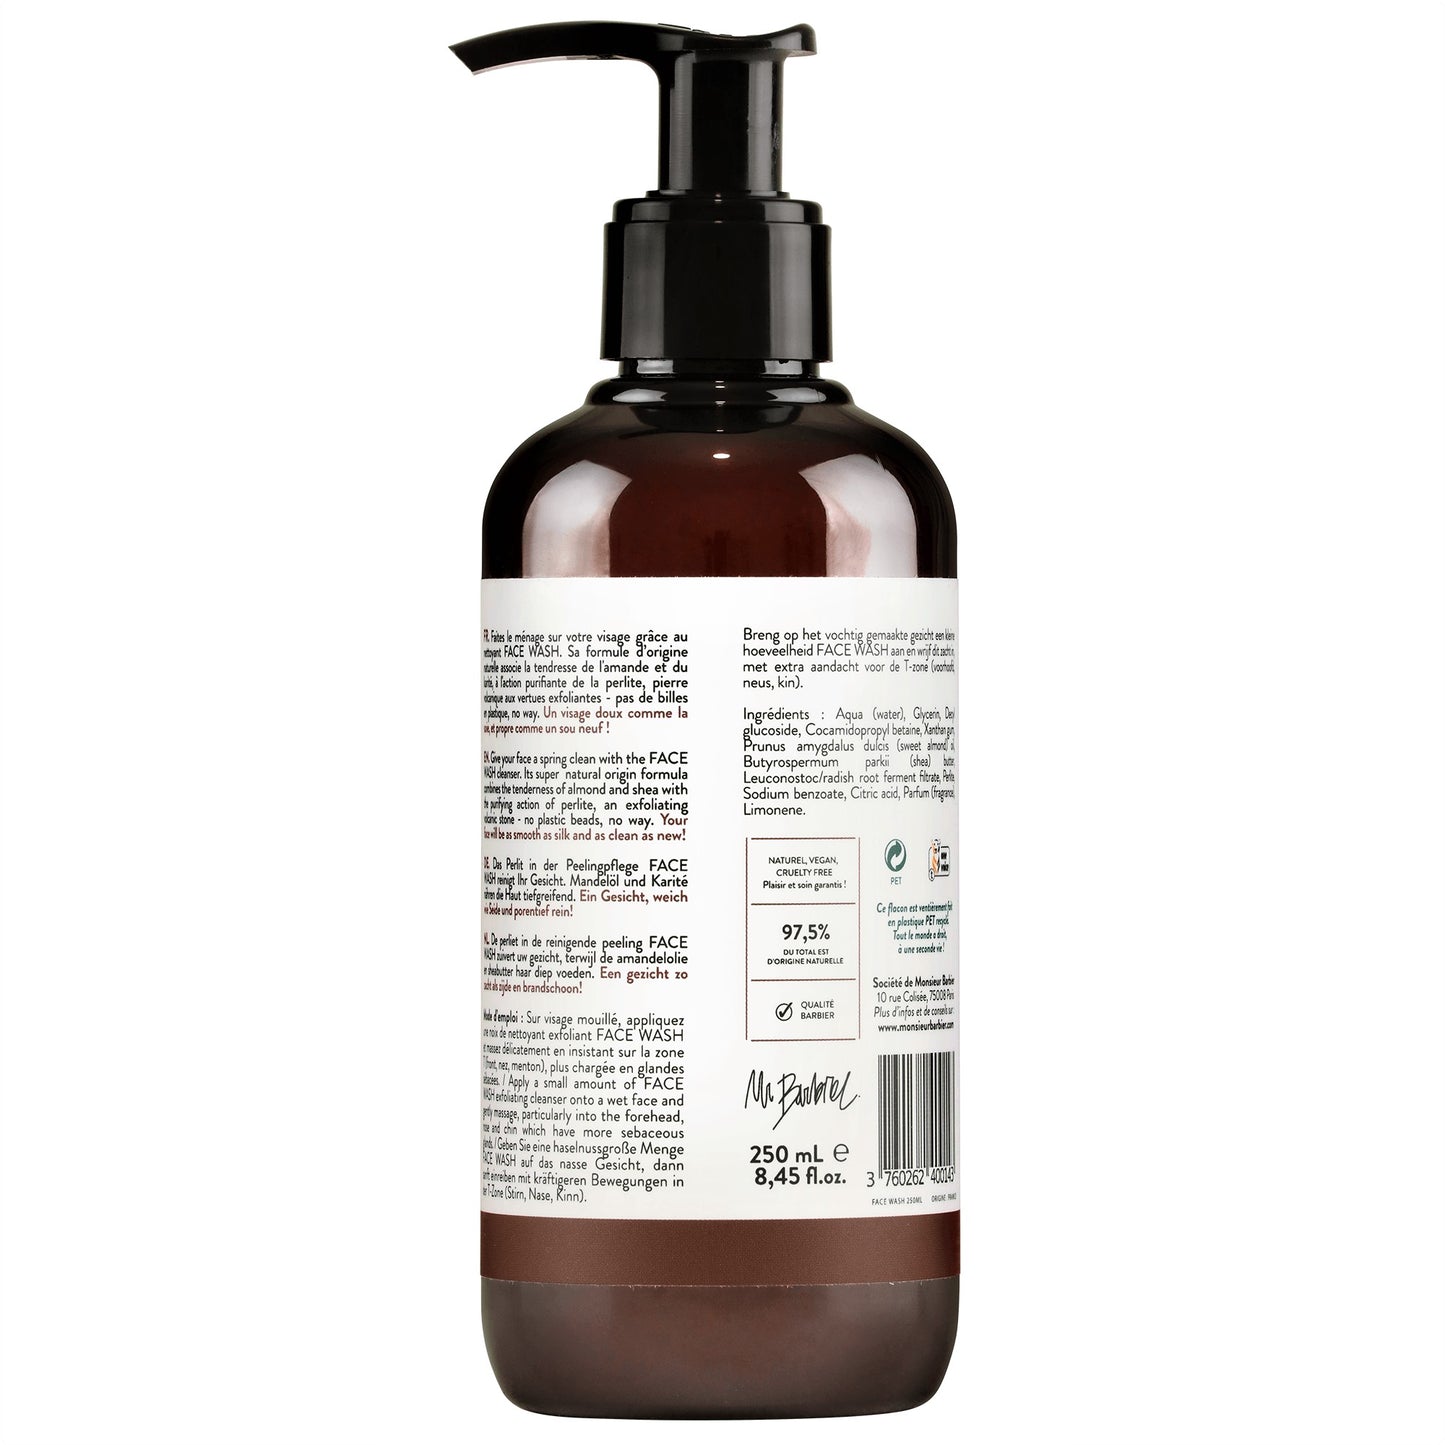 Exfoliating facial cleanser FACE WASH 250 ml